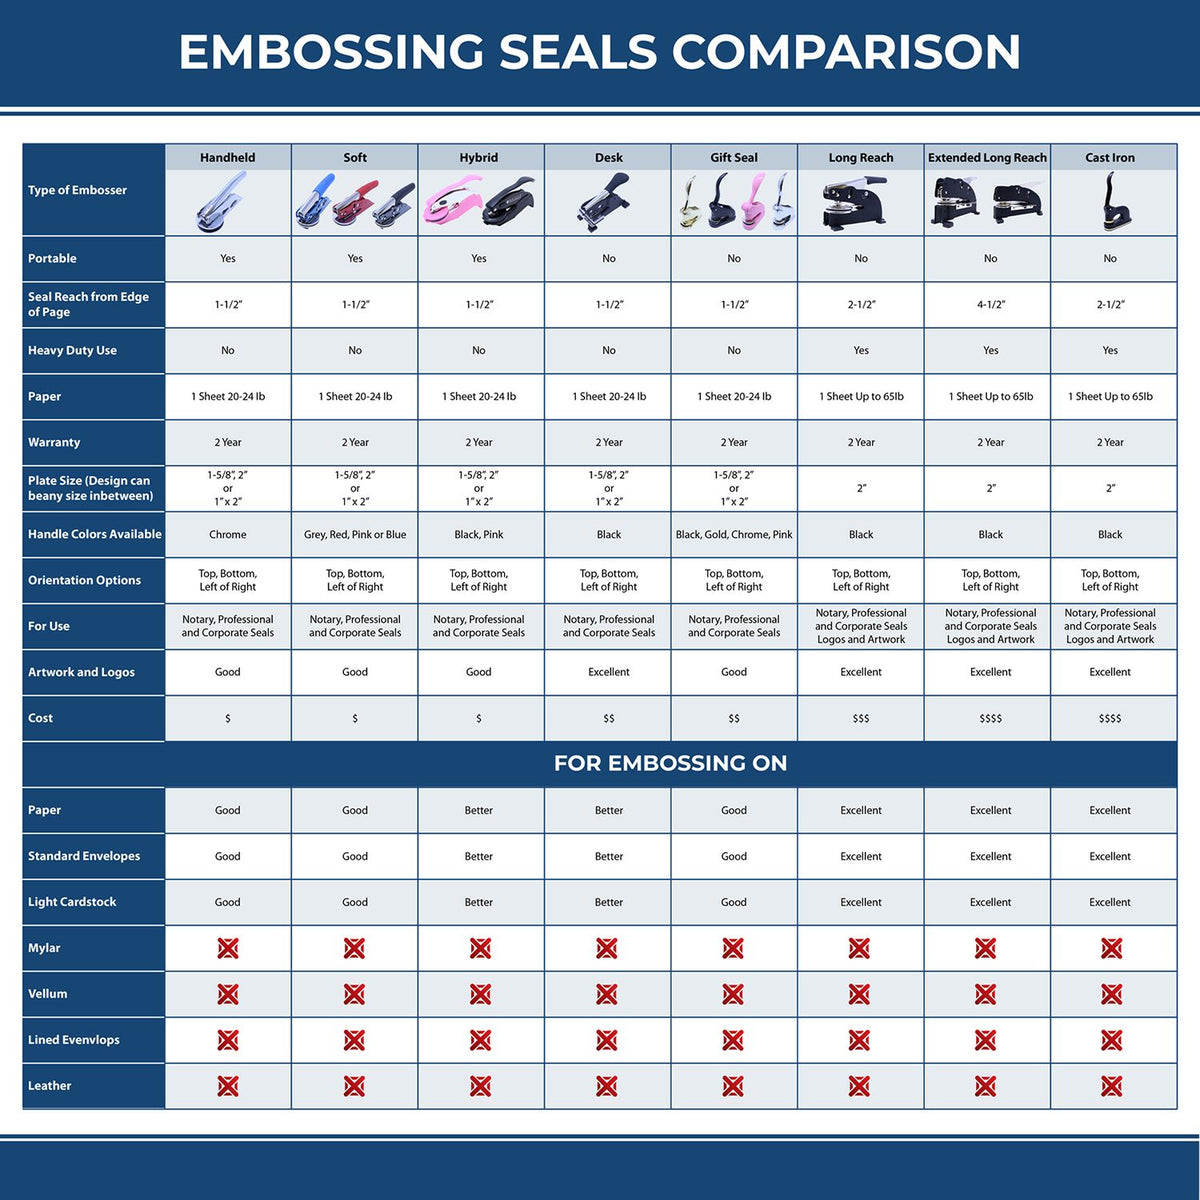 A comparison chart for the different types of mount models available for the Long Reach Maine Land Surveyor Seal.